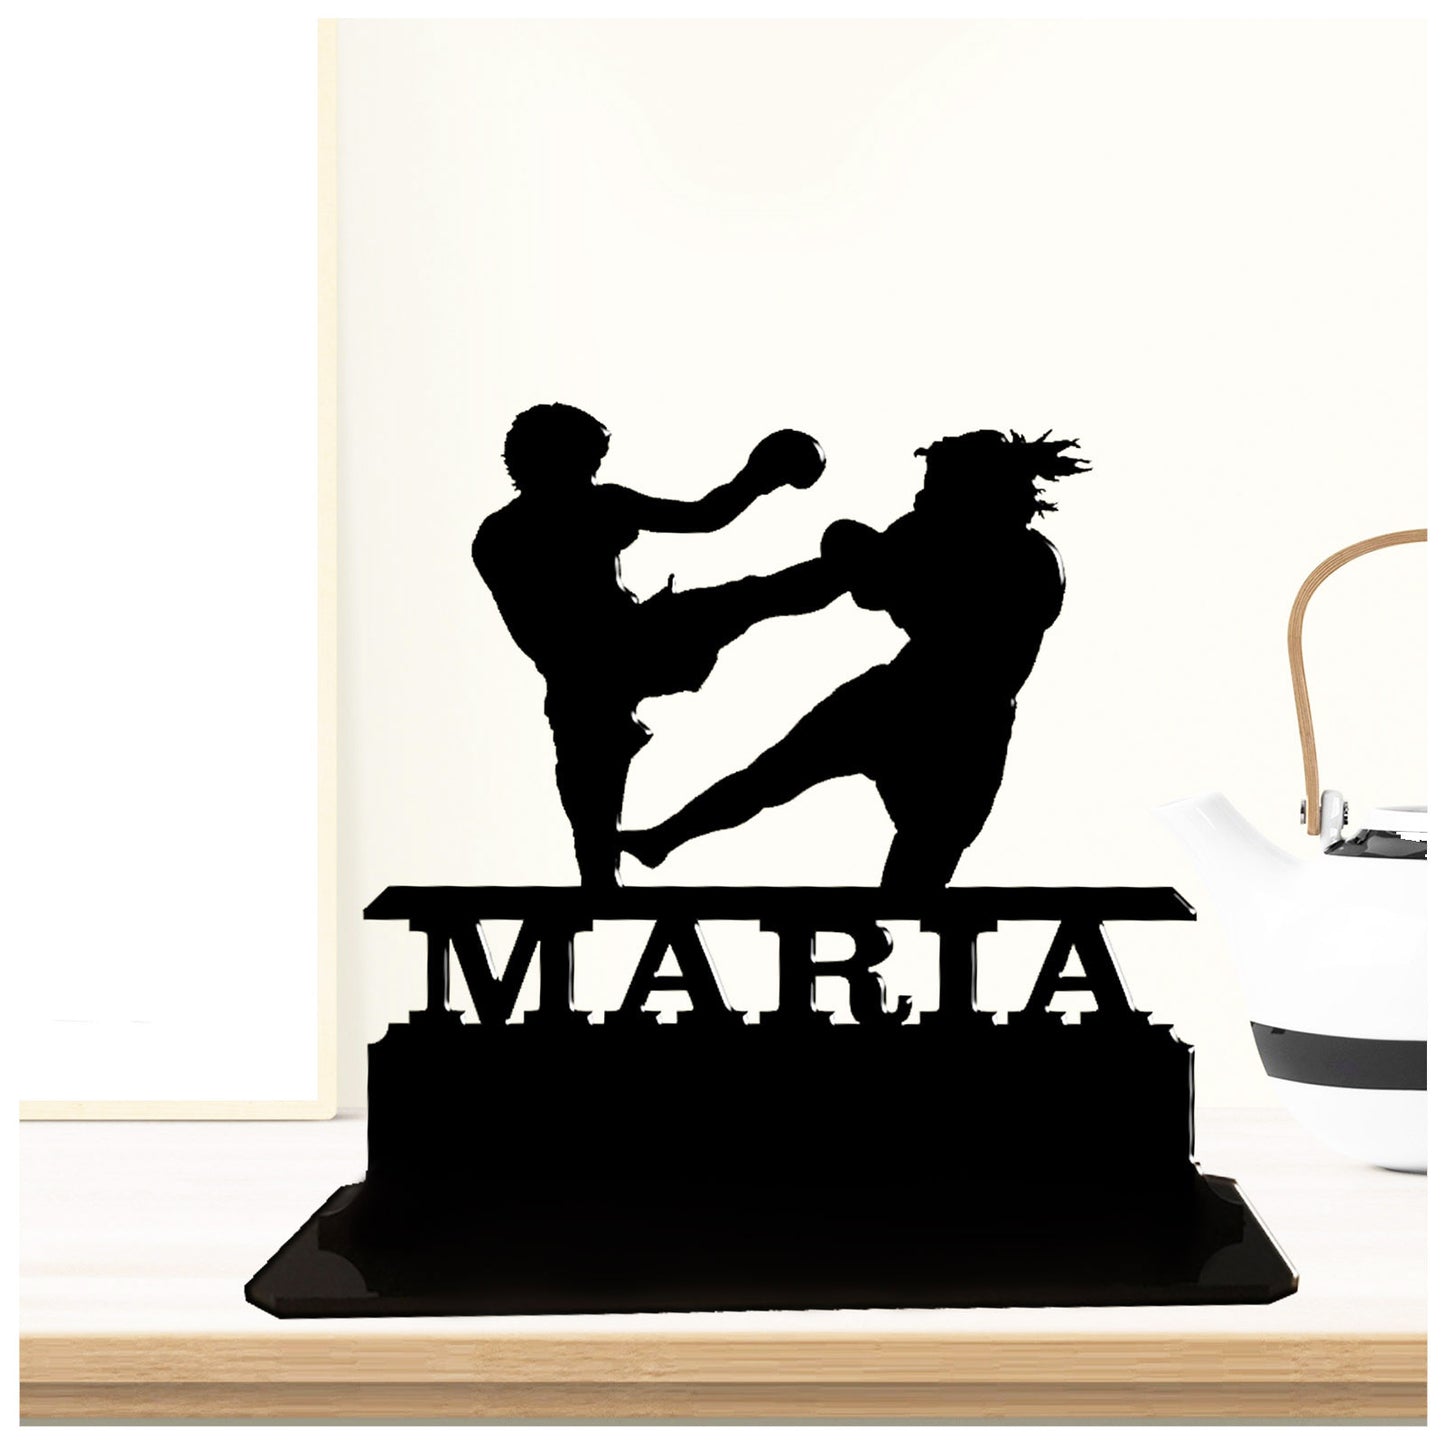 Acrylic unique personalised female thai boxing gifts ideas. Standalone ornament.